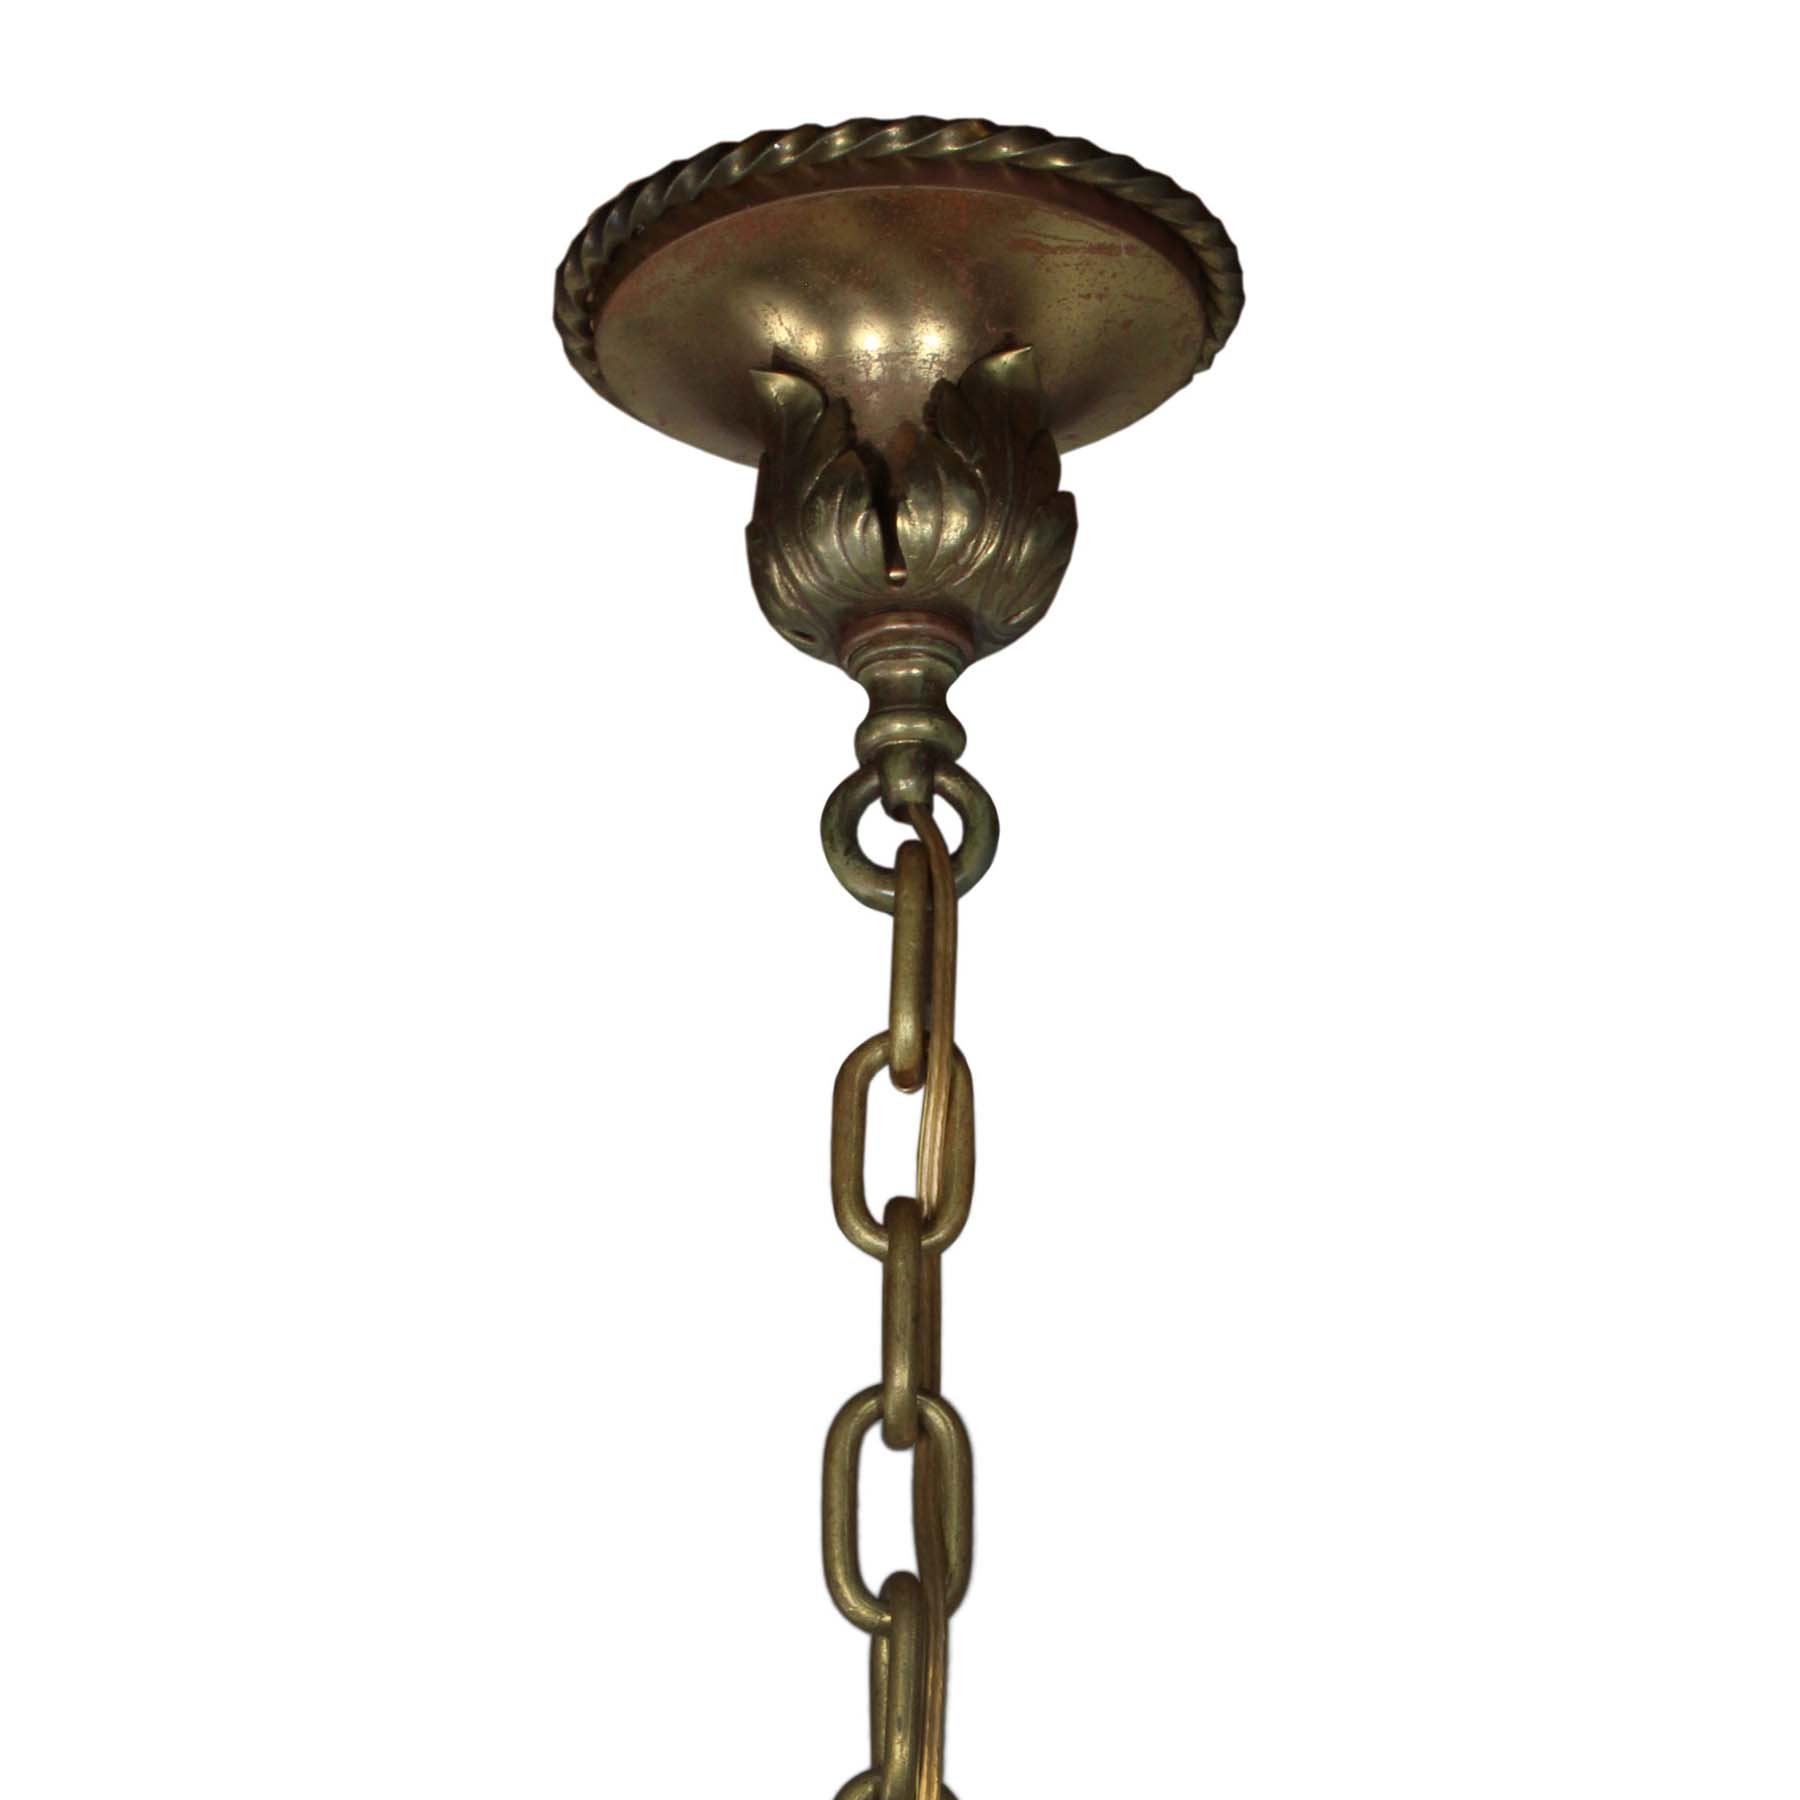 SOLD Substantial Antique Brass Chandelier with Mica -69302